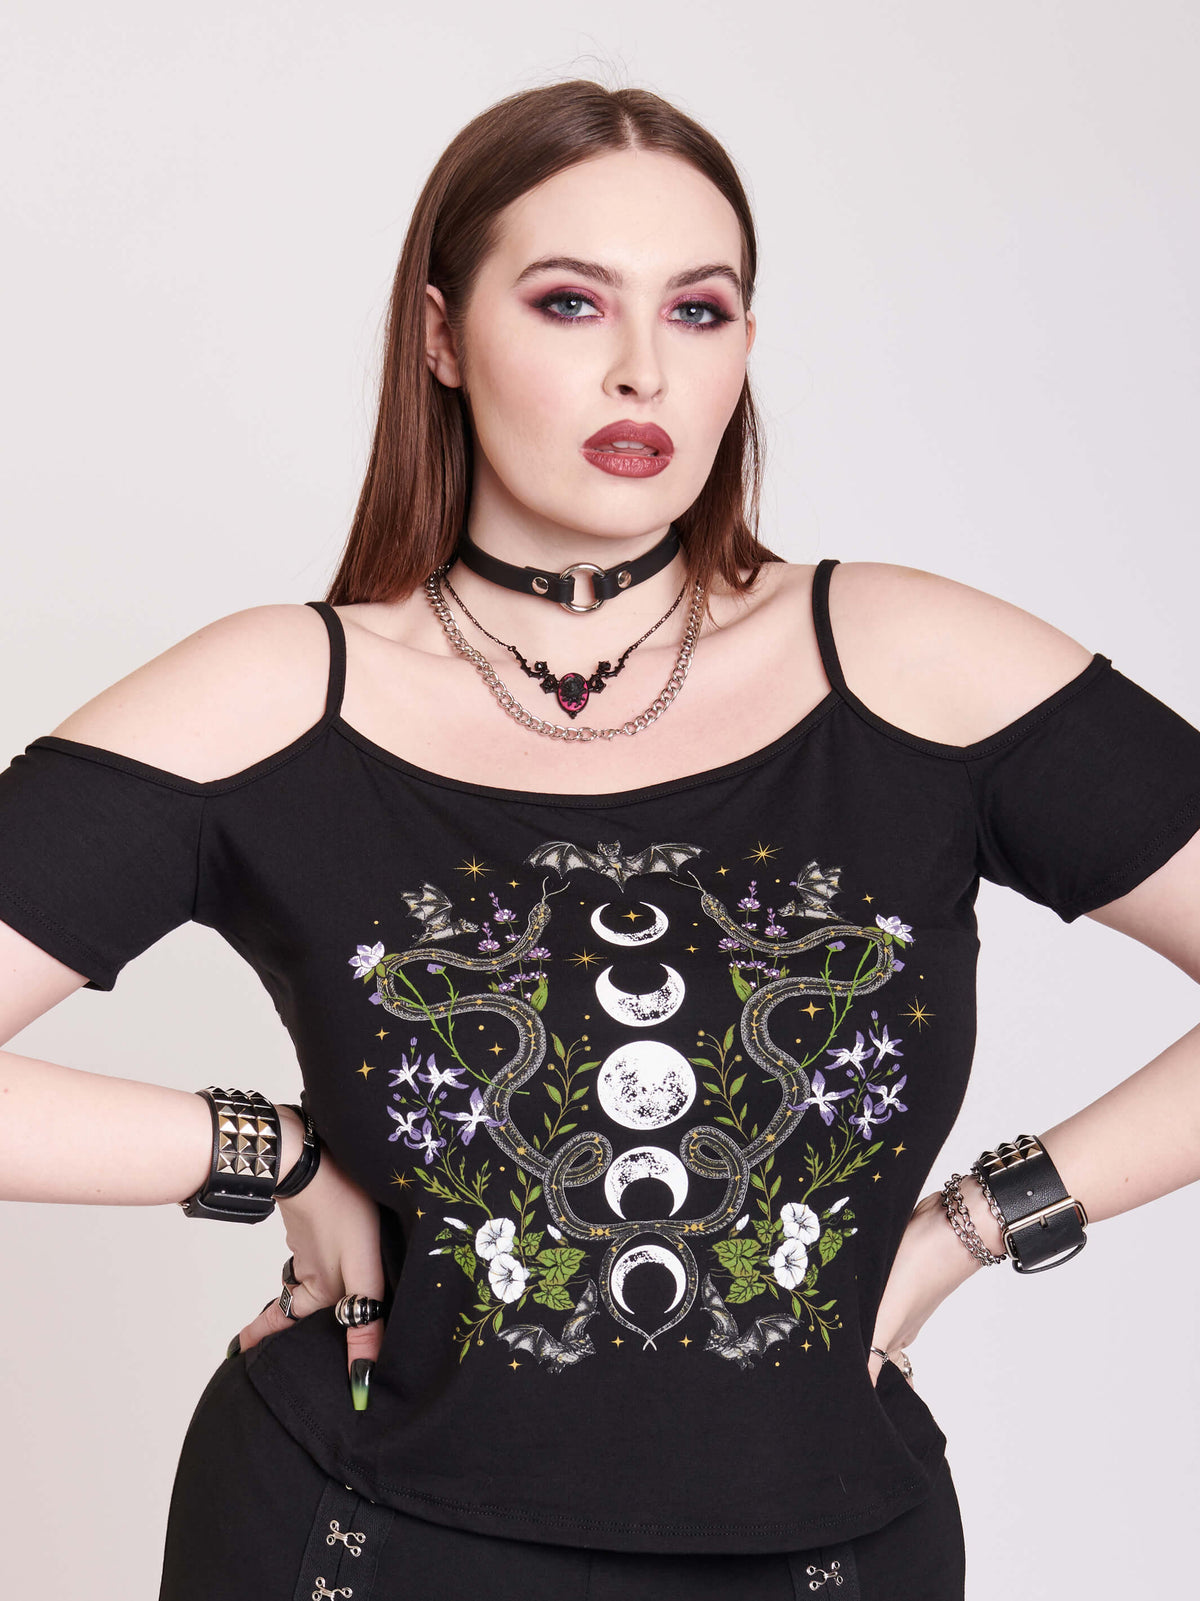 Off shoulder tank with snakes and moon phases